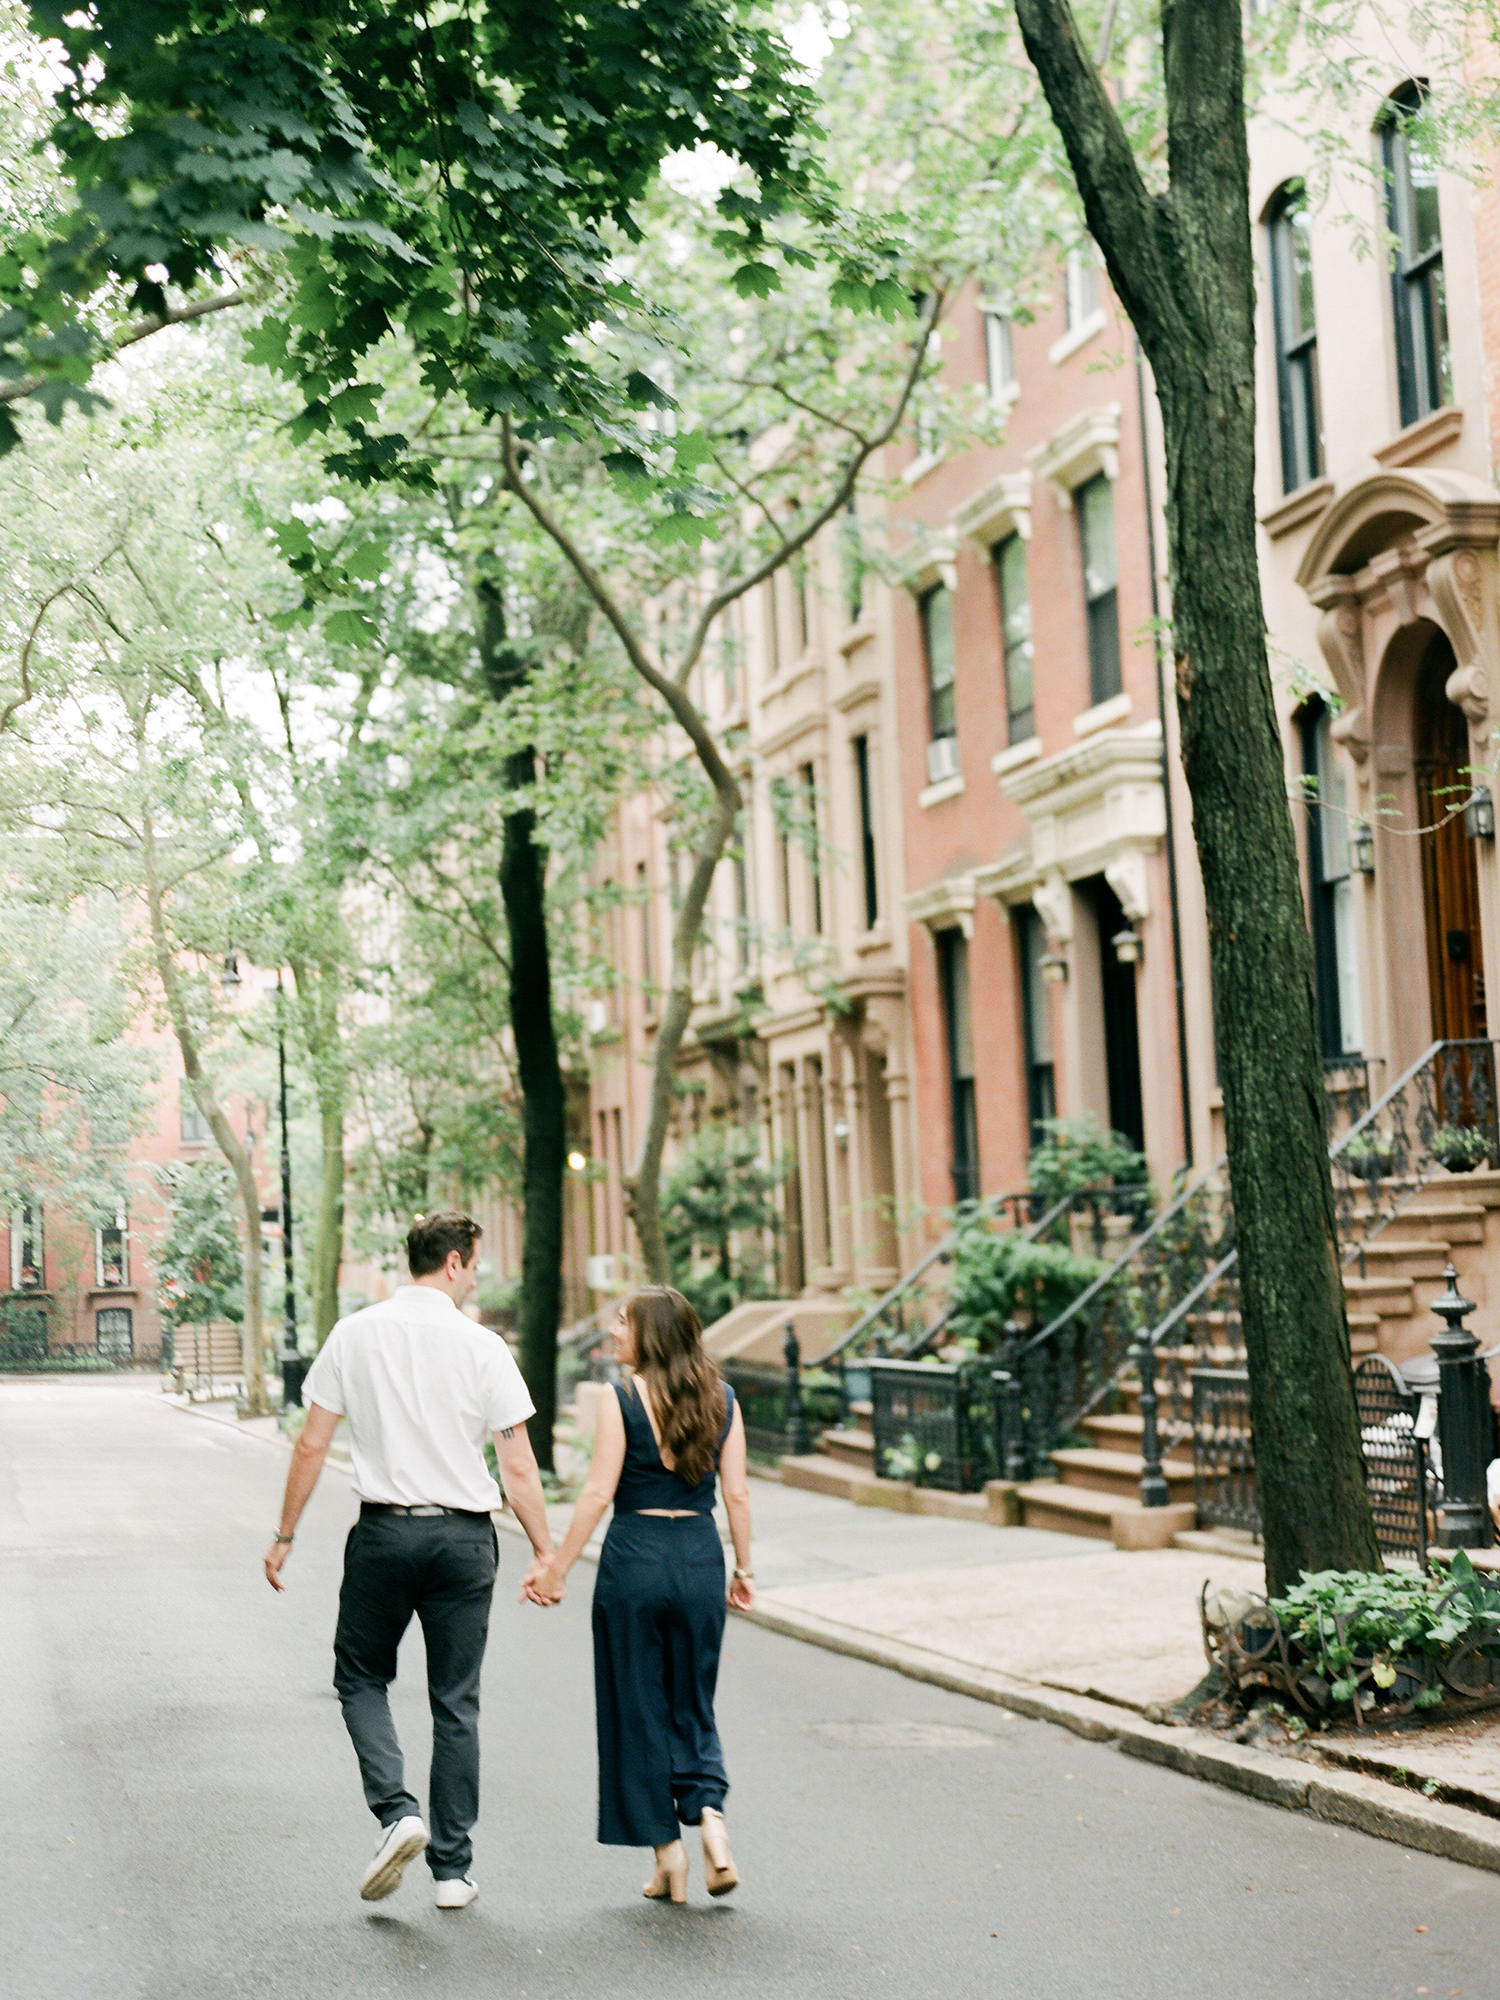 Brooklyn Heights New York neighborhood with historic brownstones and quiet streets